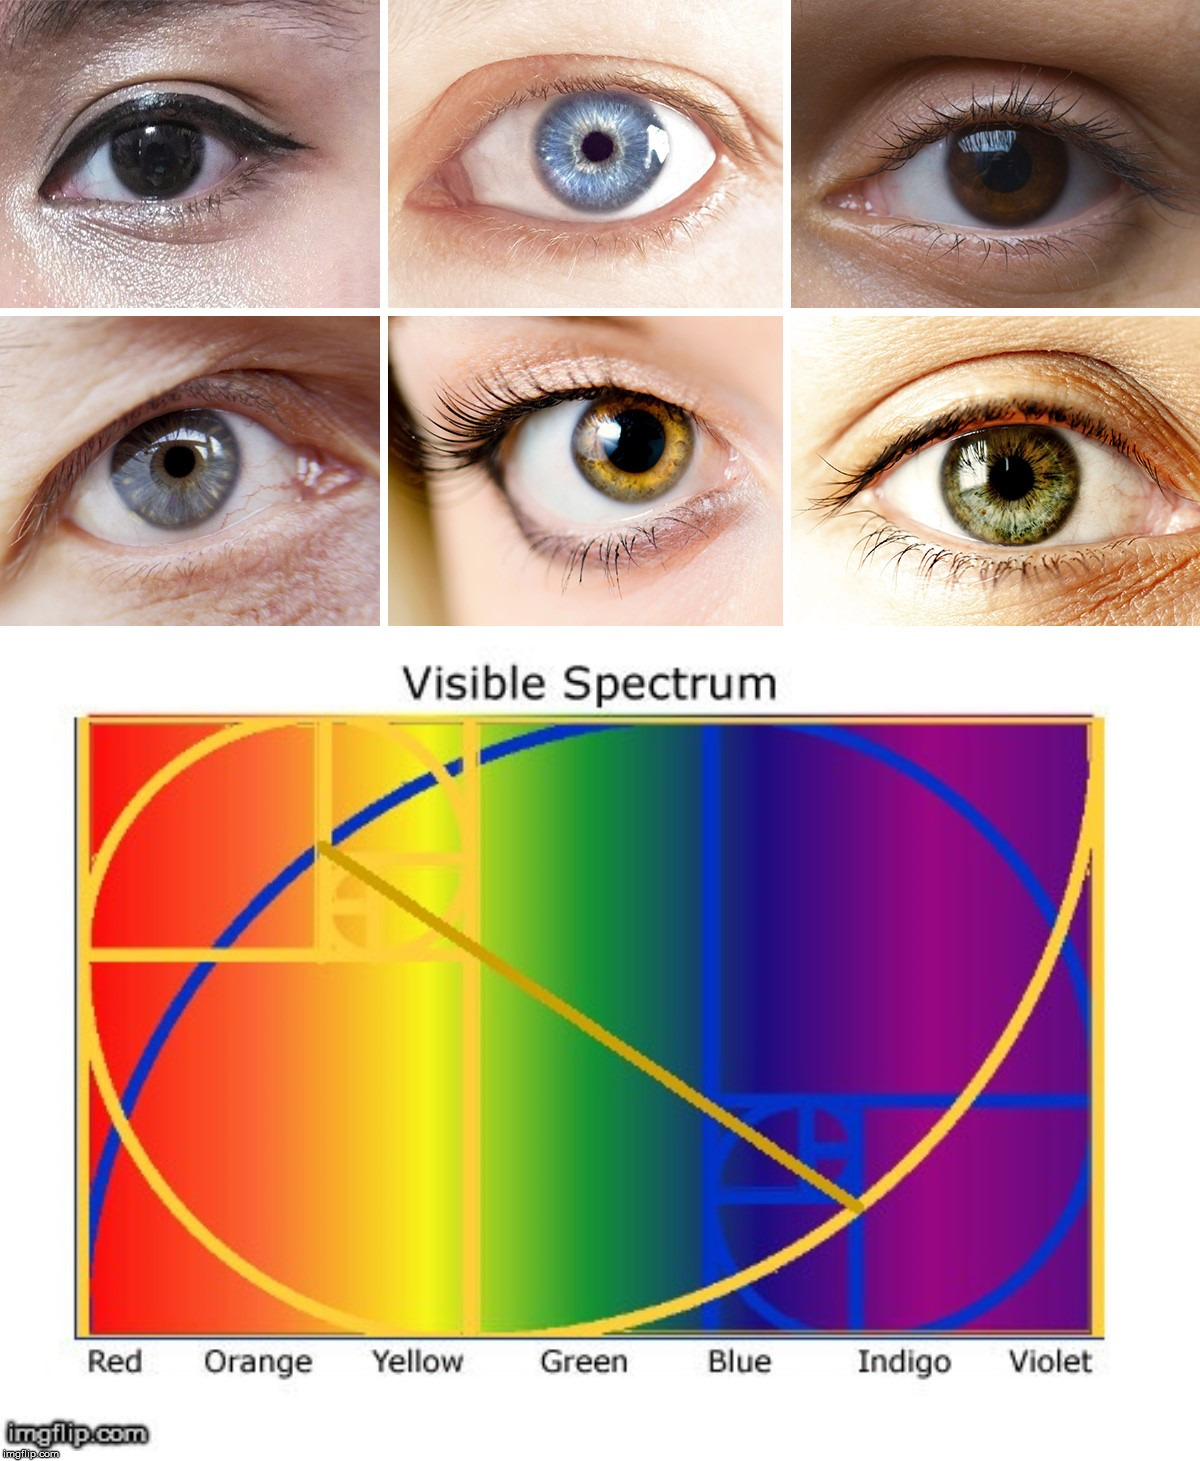 Eye Colors With The Golden Ratio. | image tagged in the golden ratio,eyes,colors,vision,visible spectrum | made w/ Imgflip meme maker